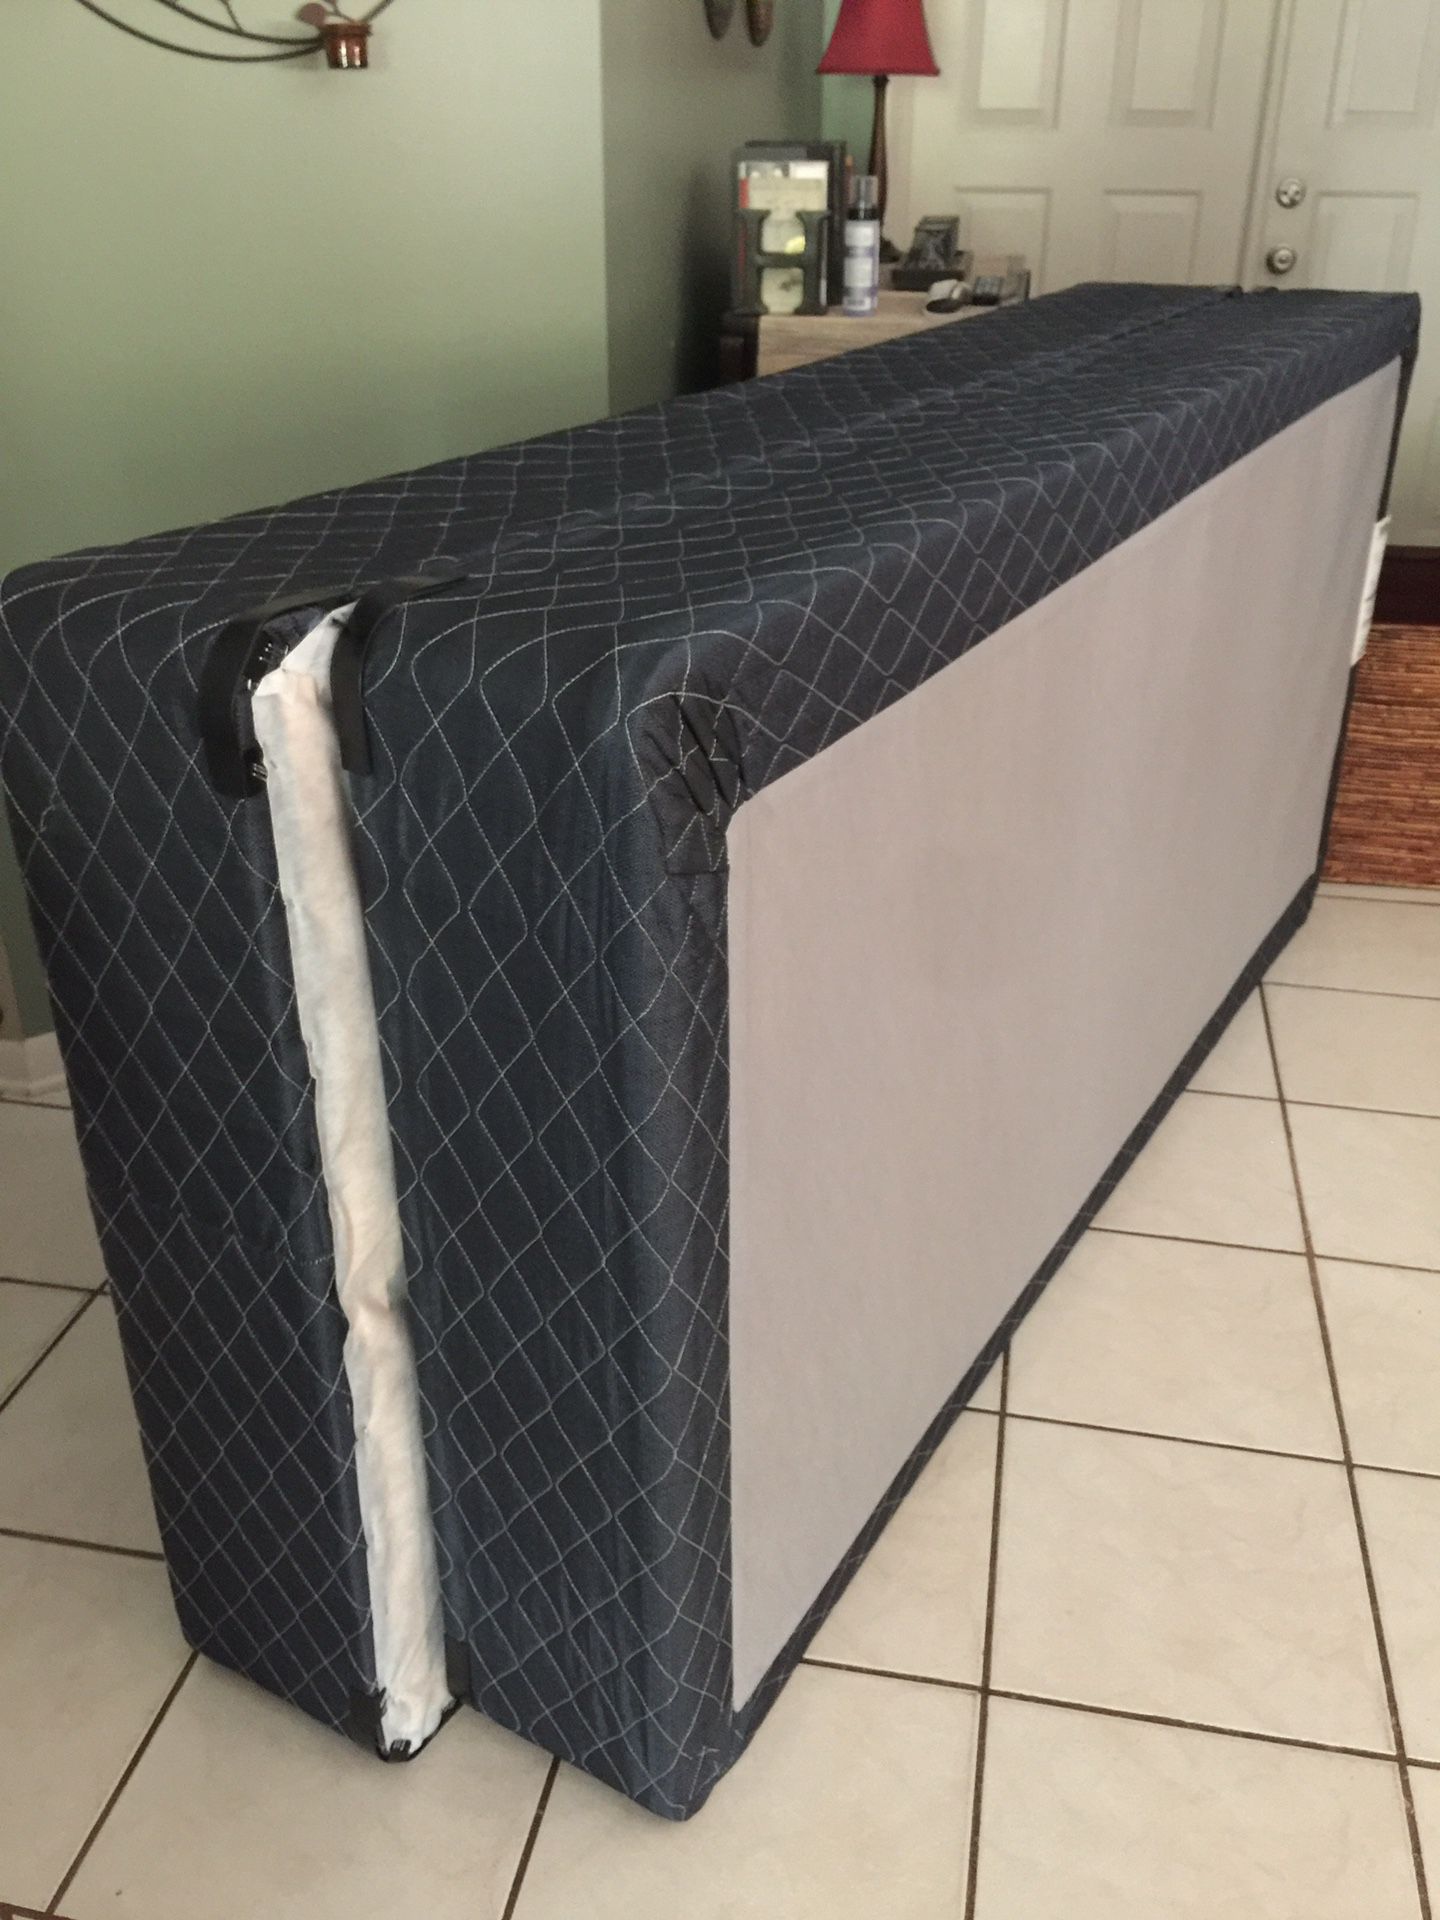 King (two twins) box spring and frame.